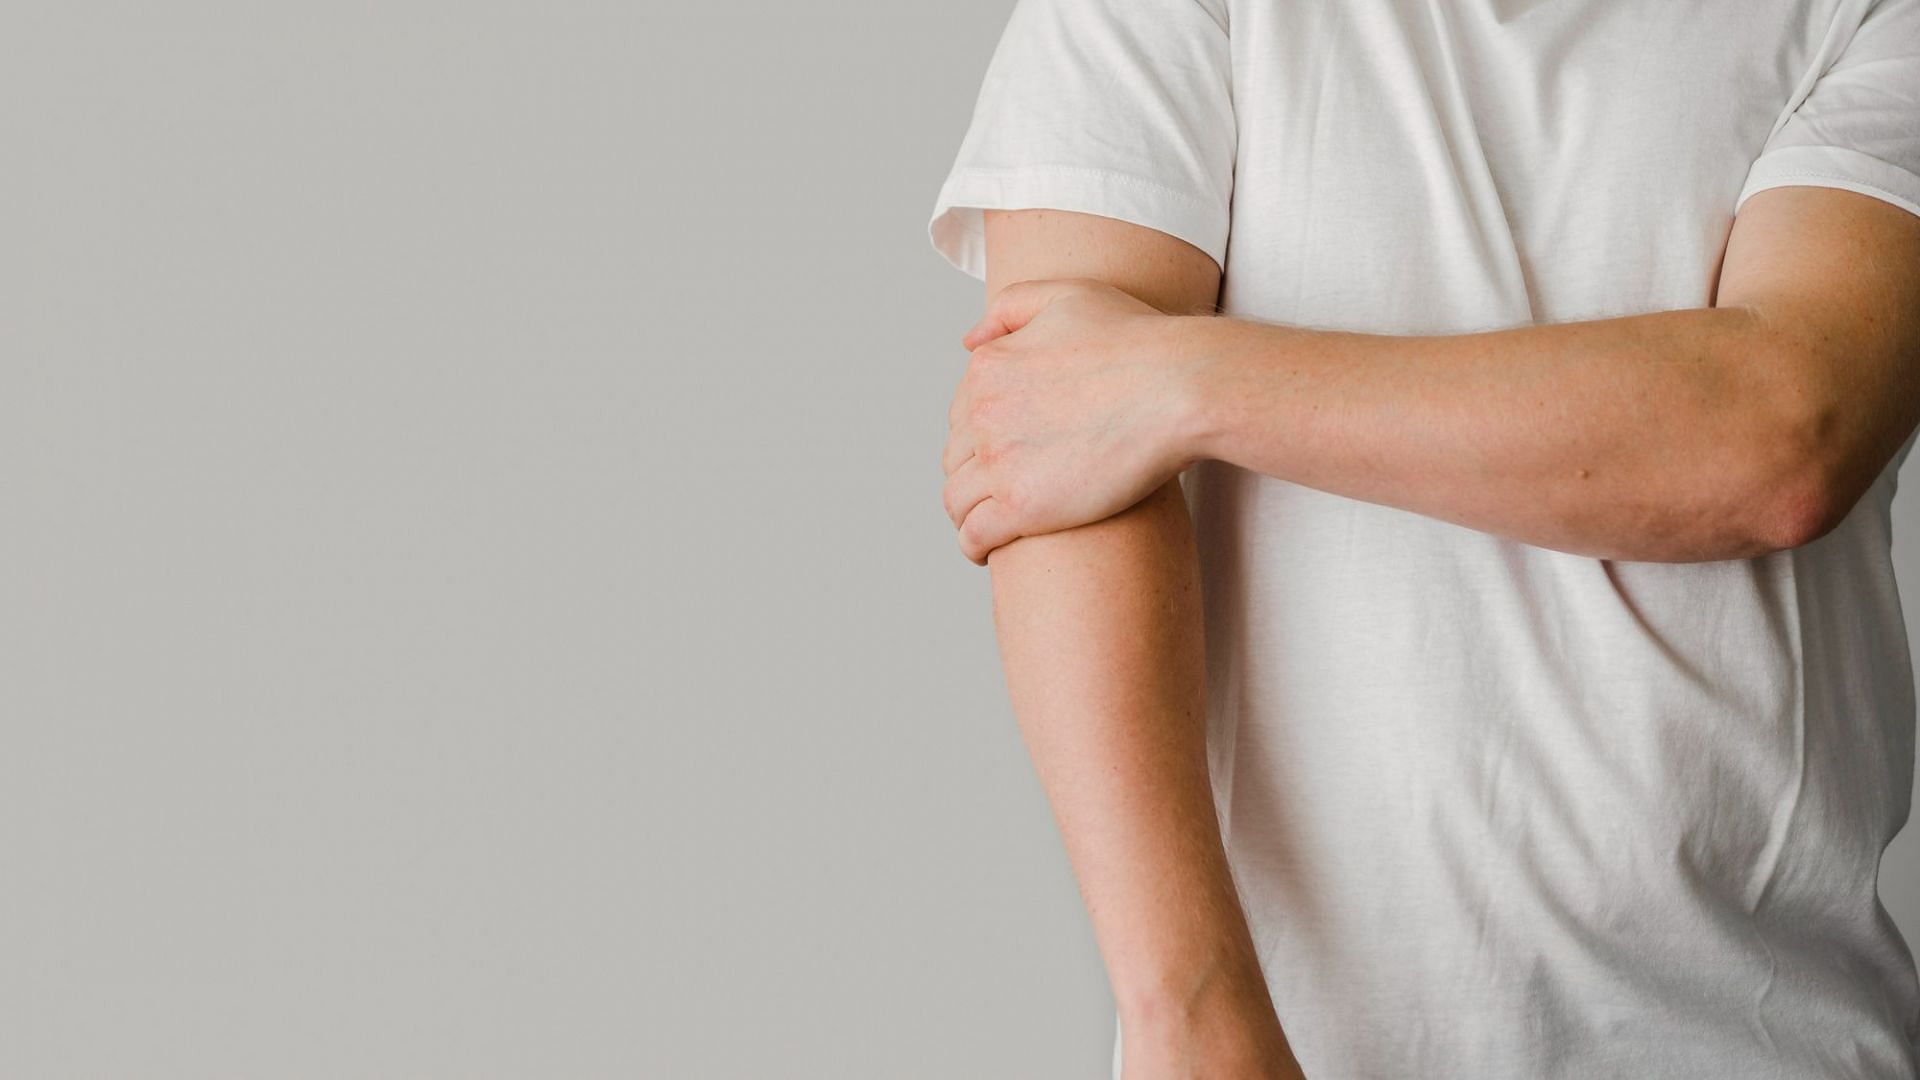 Sprain in elbow can slow down your elbow movements (Image by Freepik)